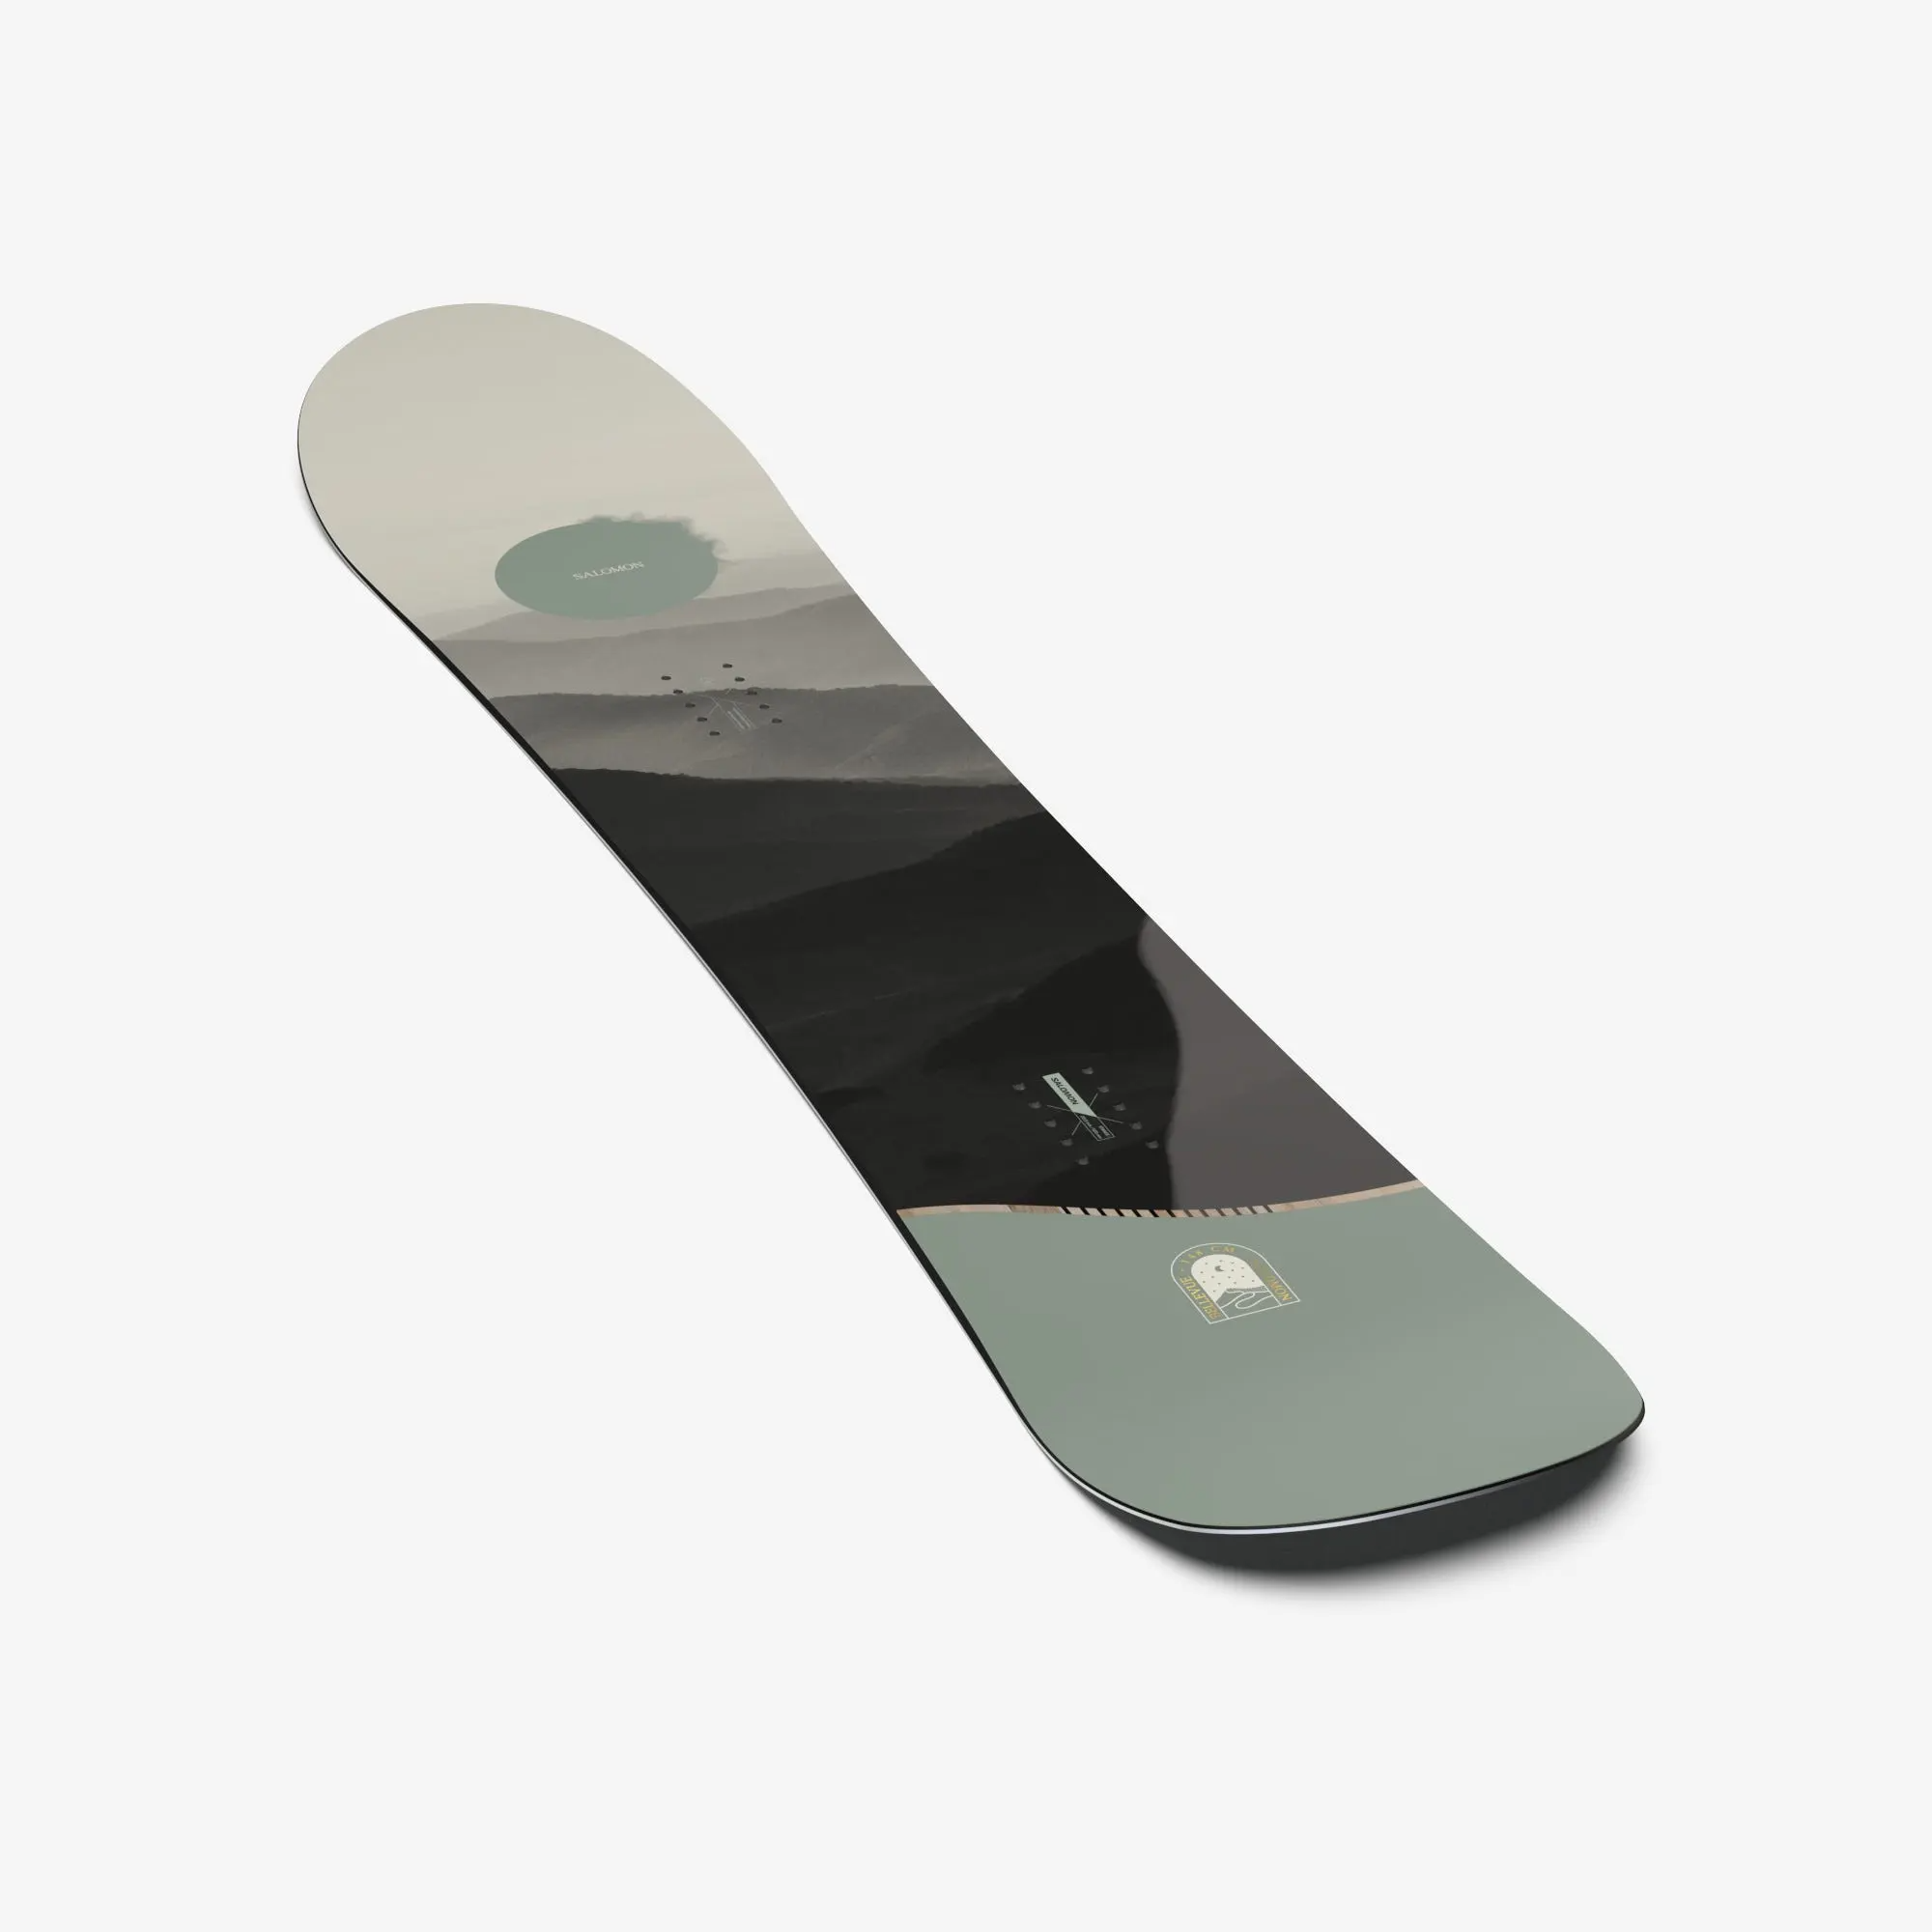 Designed for ladies looking for precise edge control. Whether you’re, ripping pow or carving groomers, the wider design with the control under your back foot and allows for smooth maneuverability, speed, float, and belongs in every quiver.